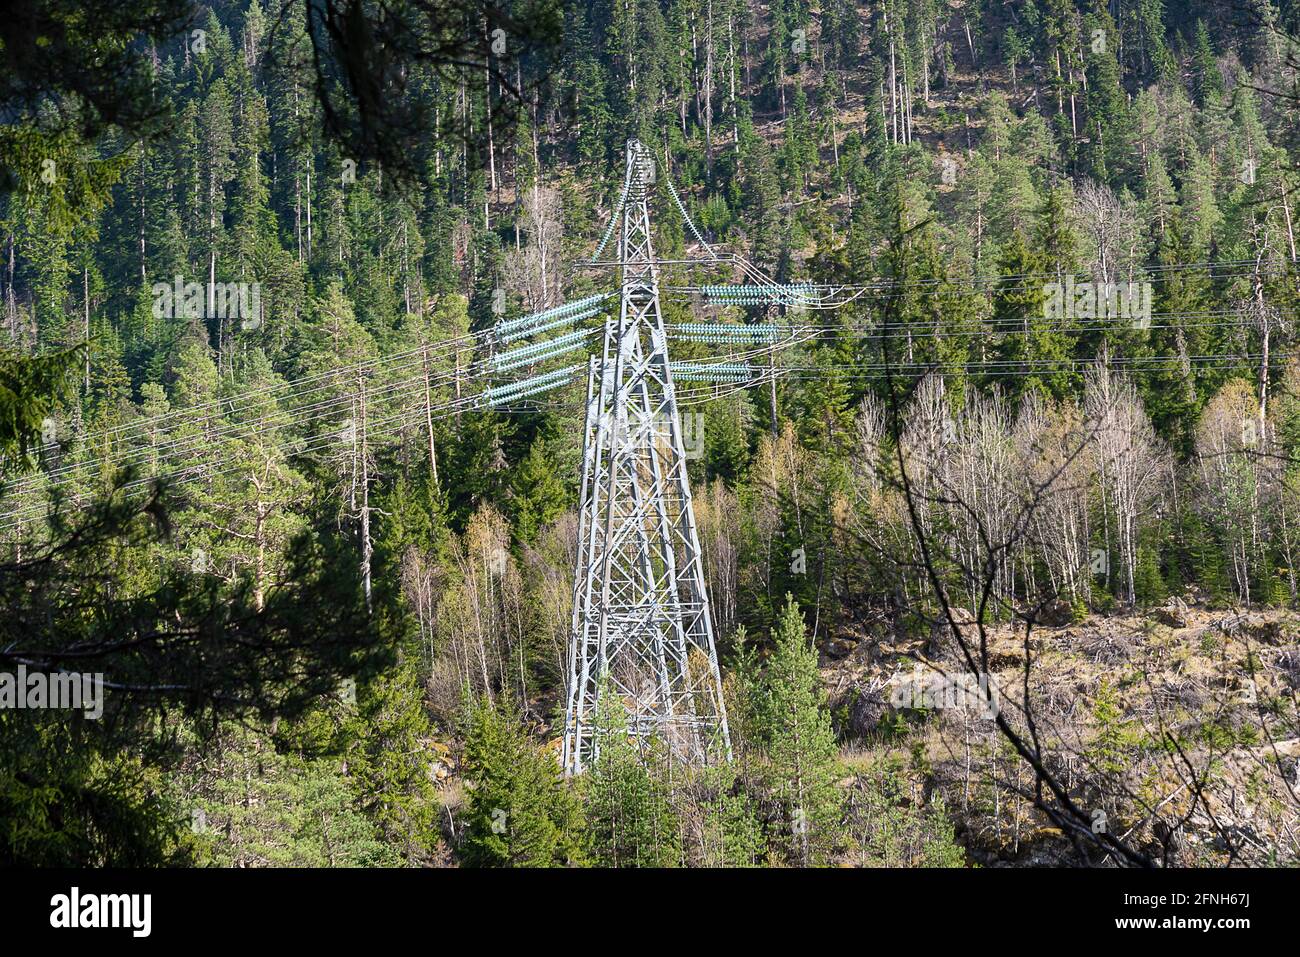 high voltage power lines next to conifers in the mountains Stock Photo